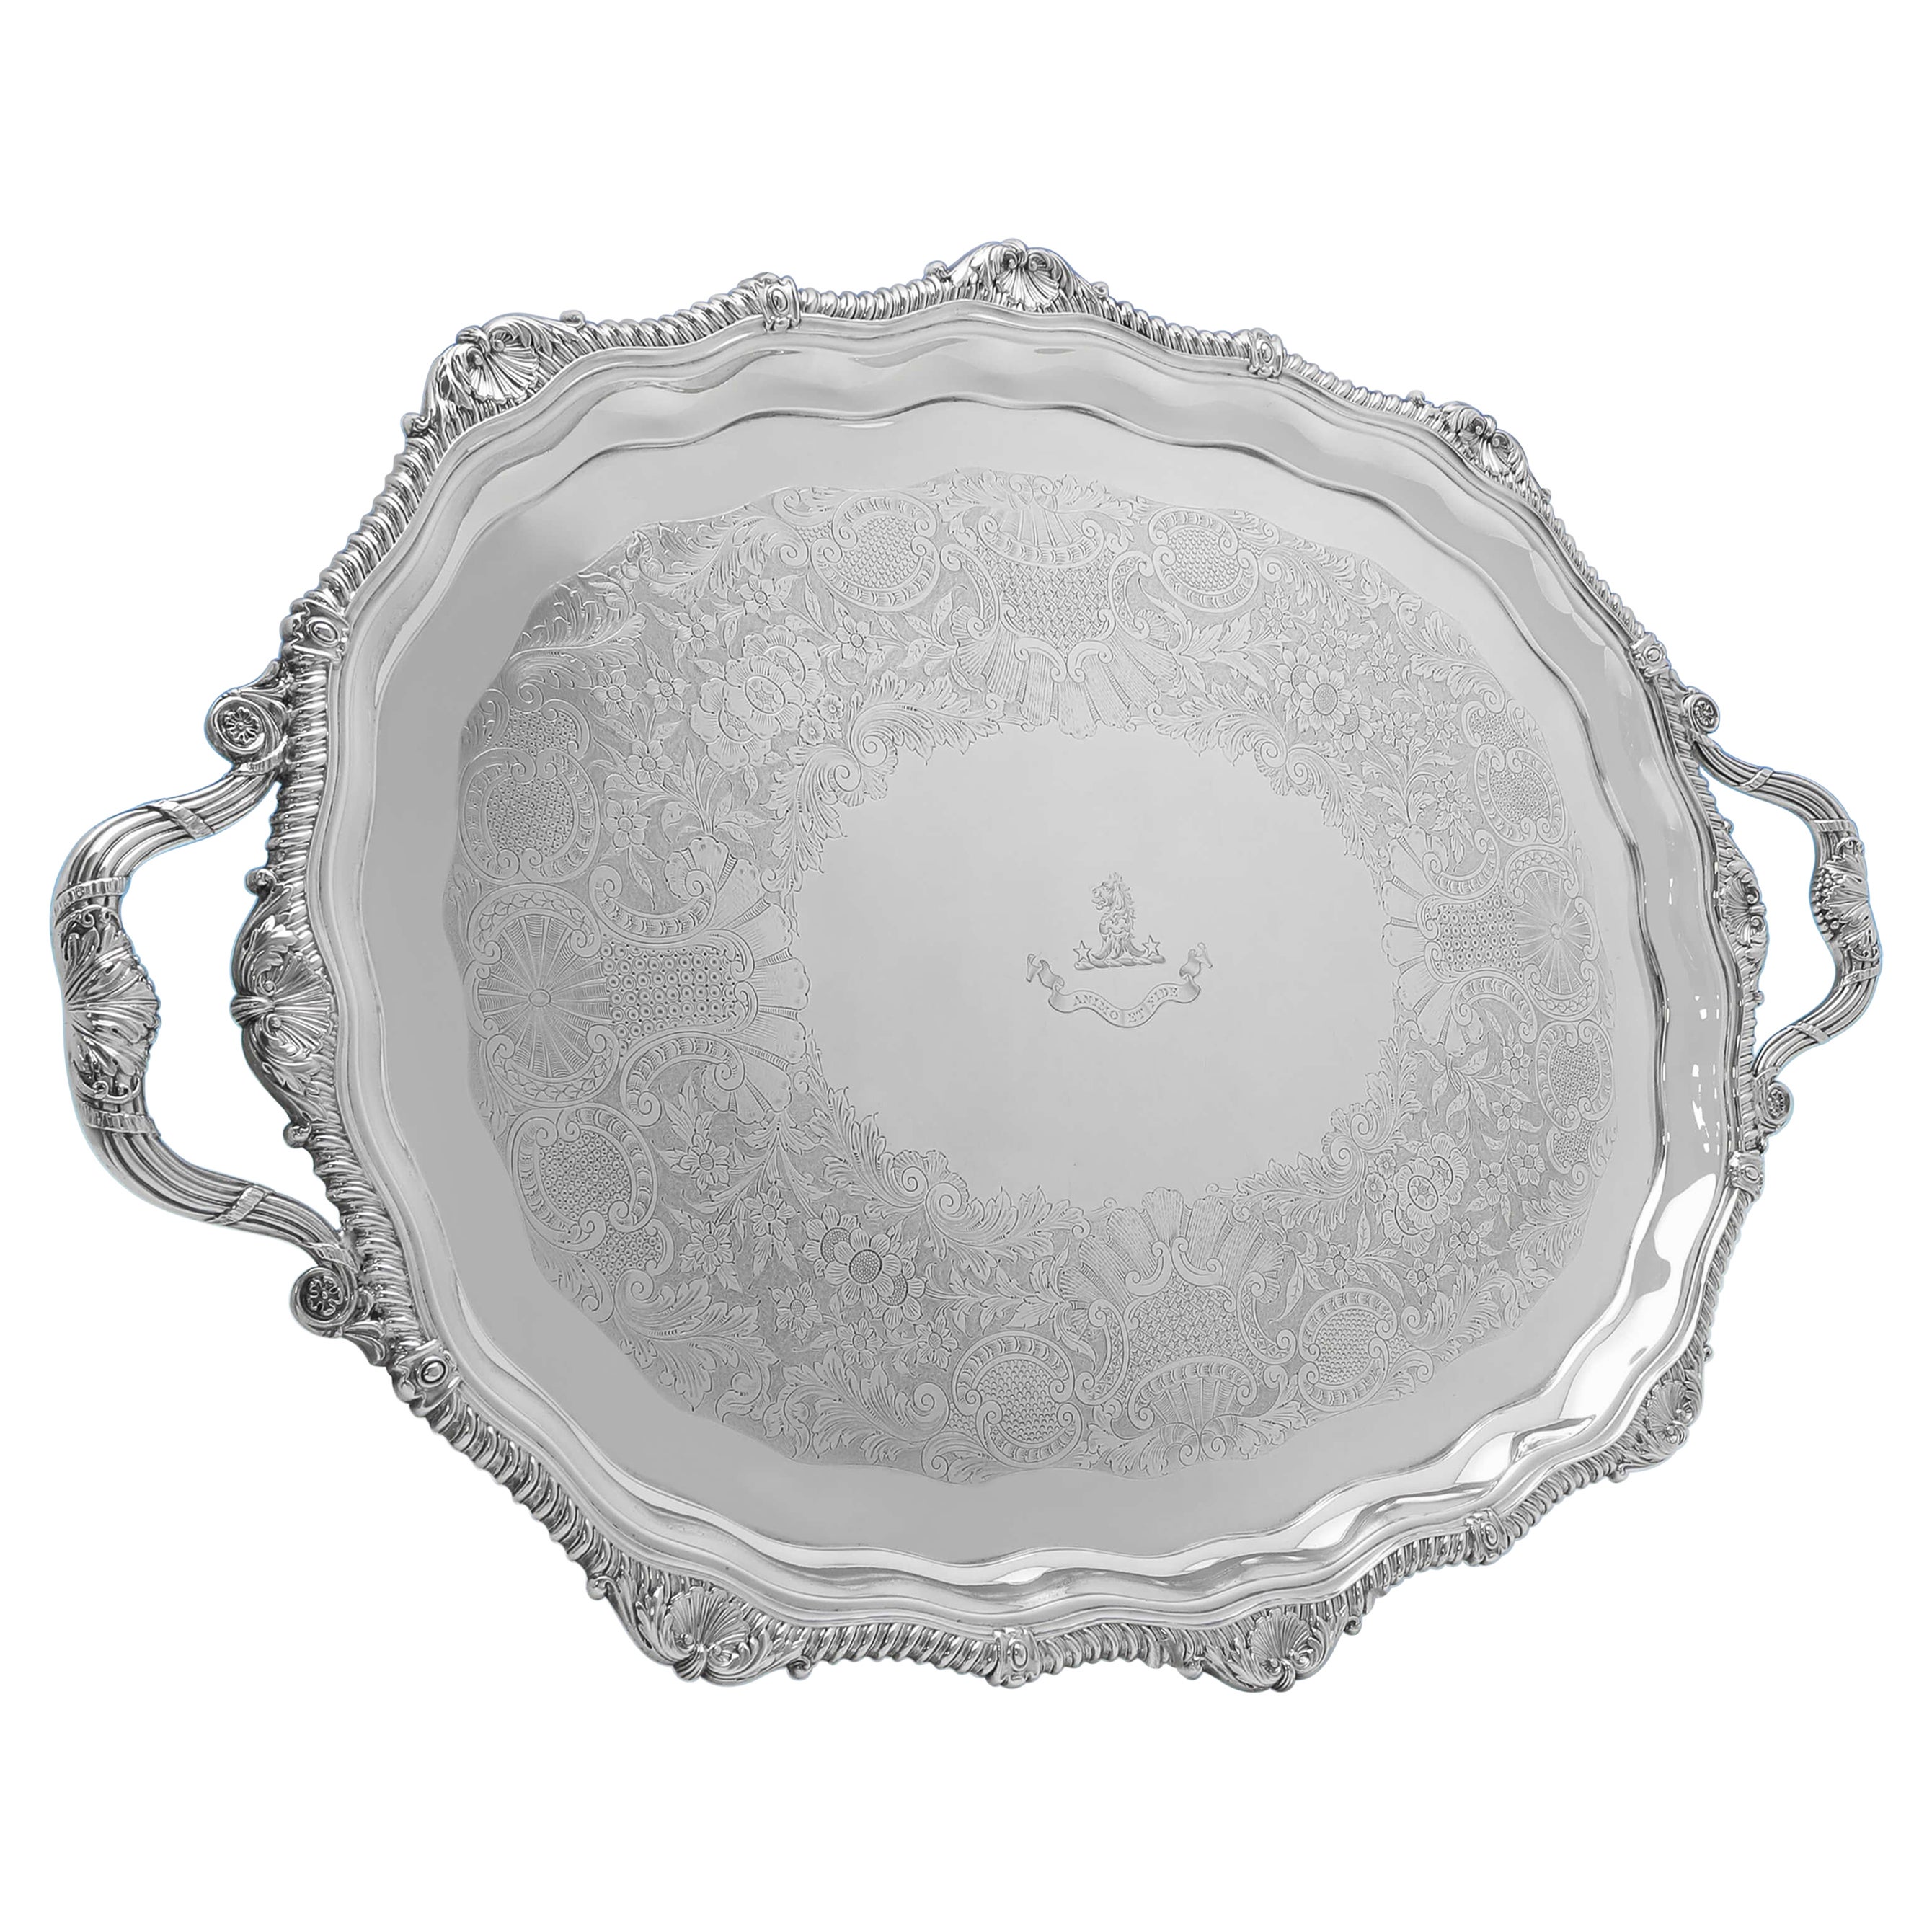 Large Edwardian Antique English Silver Tray, Hallmarked in London in 1905 For Sale